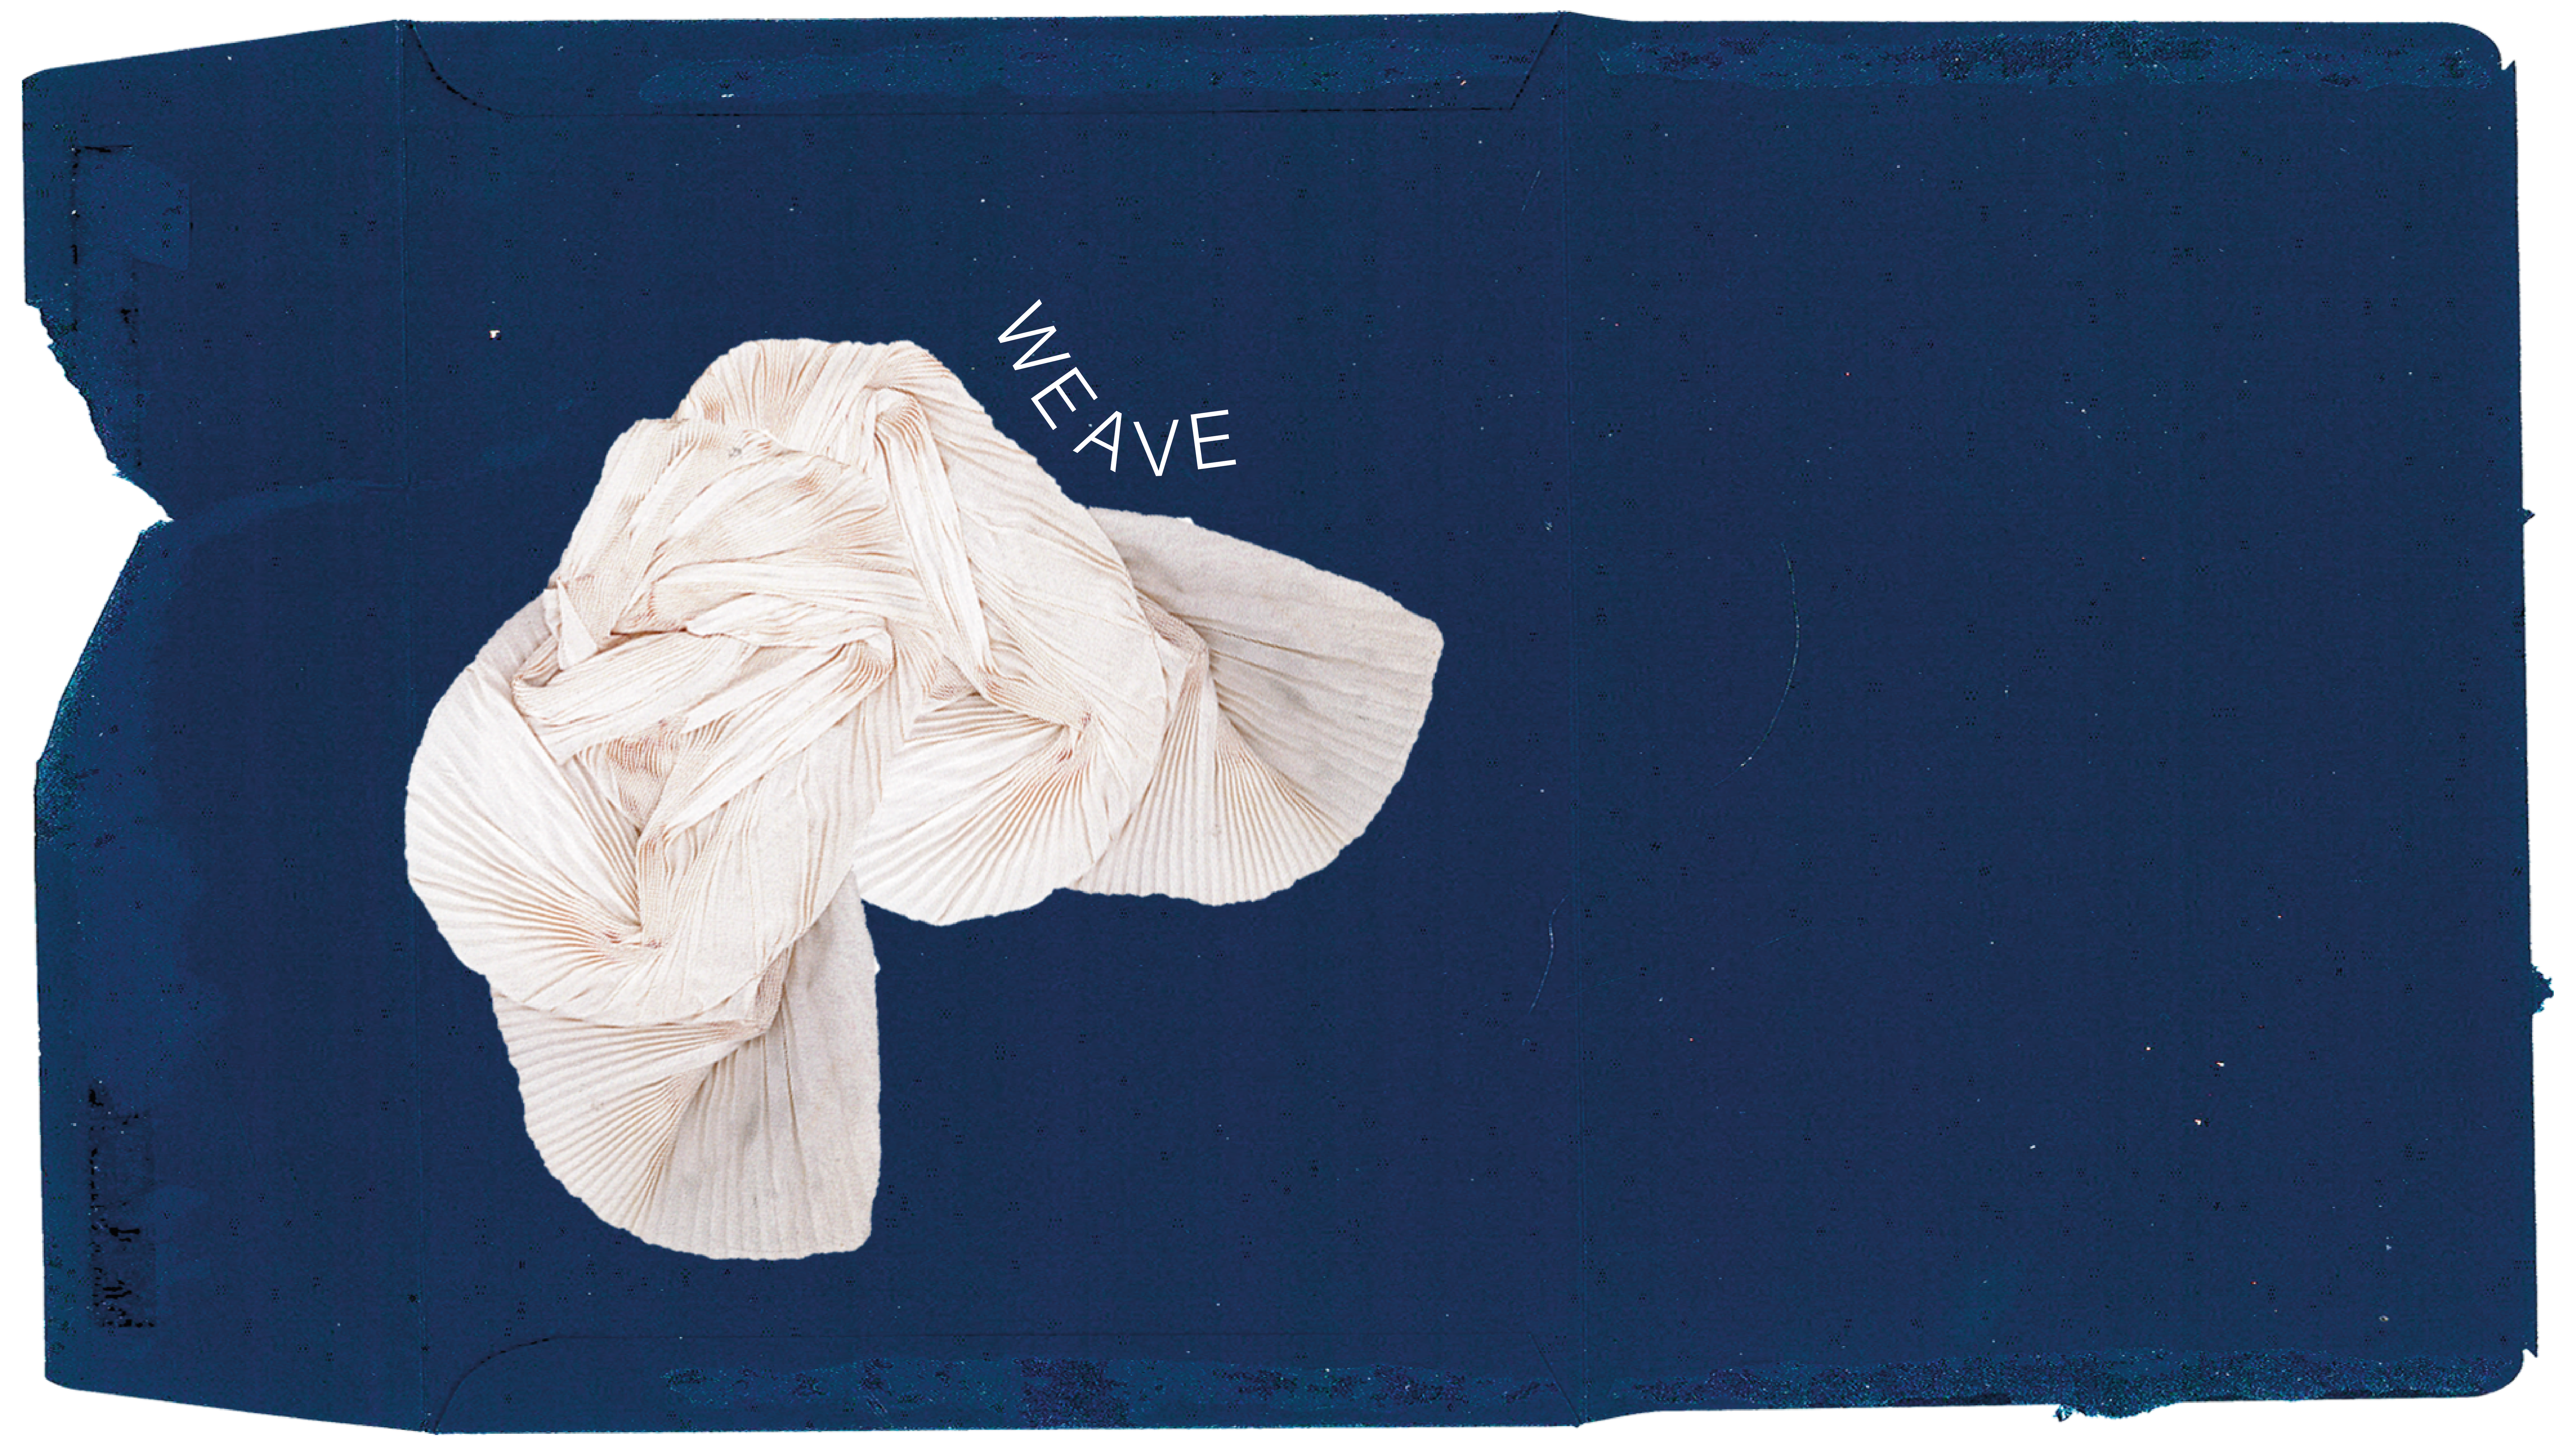 Graphic saying 'weave' in white writing, with navy background, with a cream abstract shape below